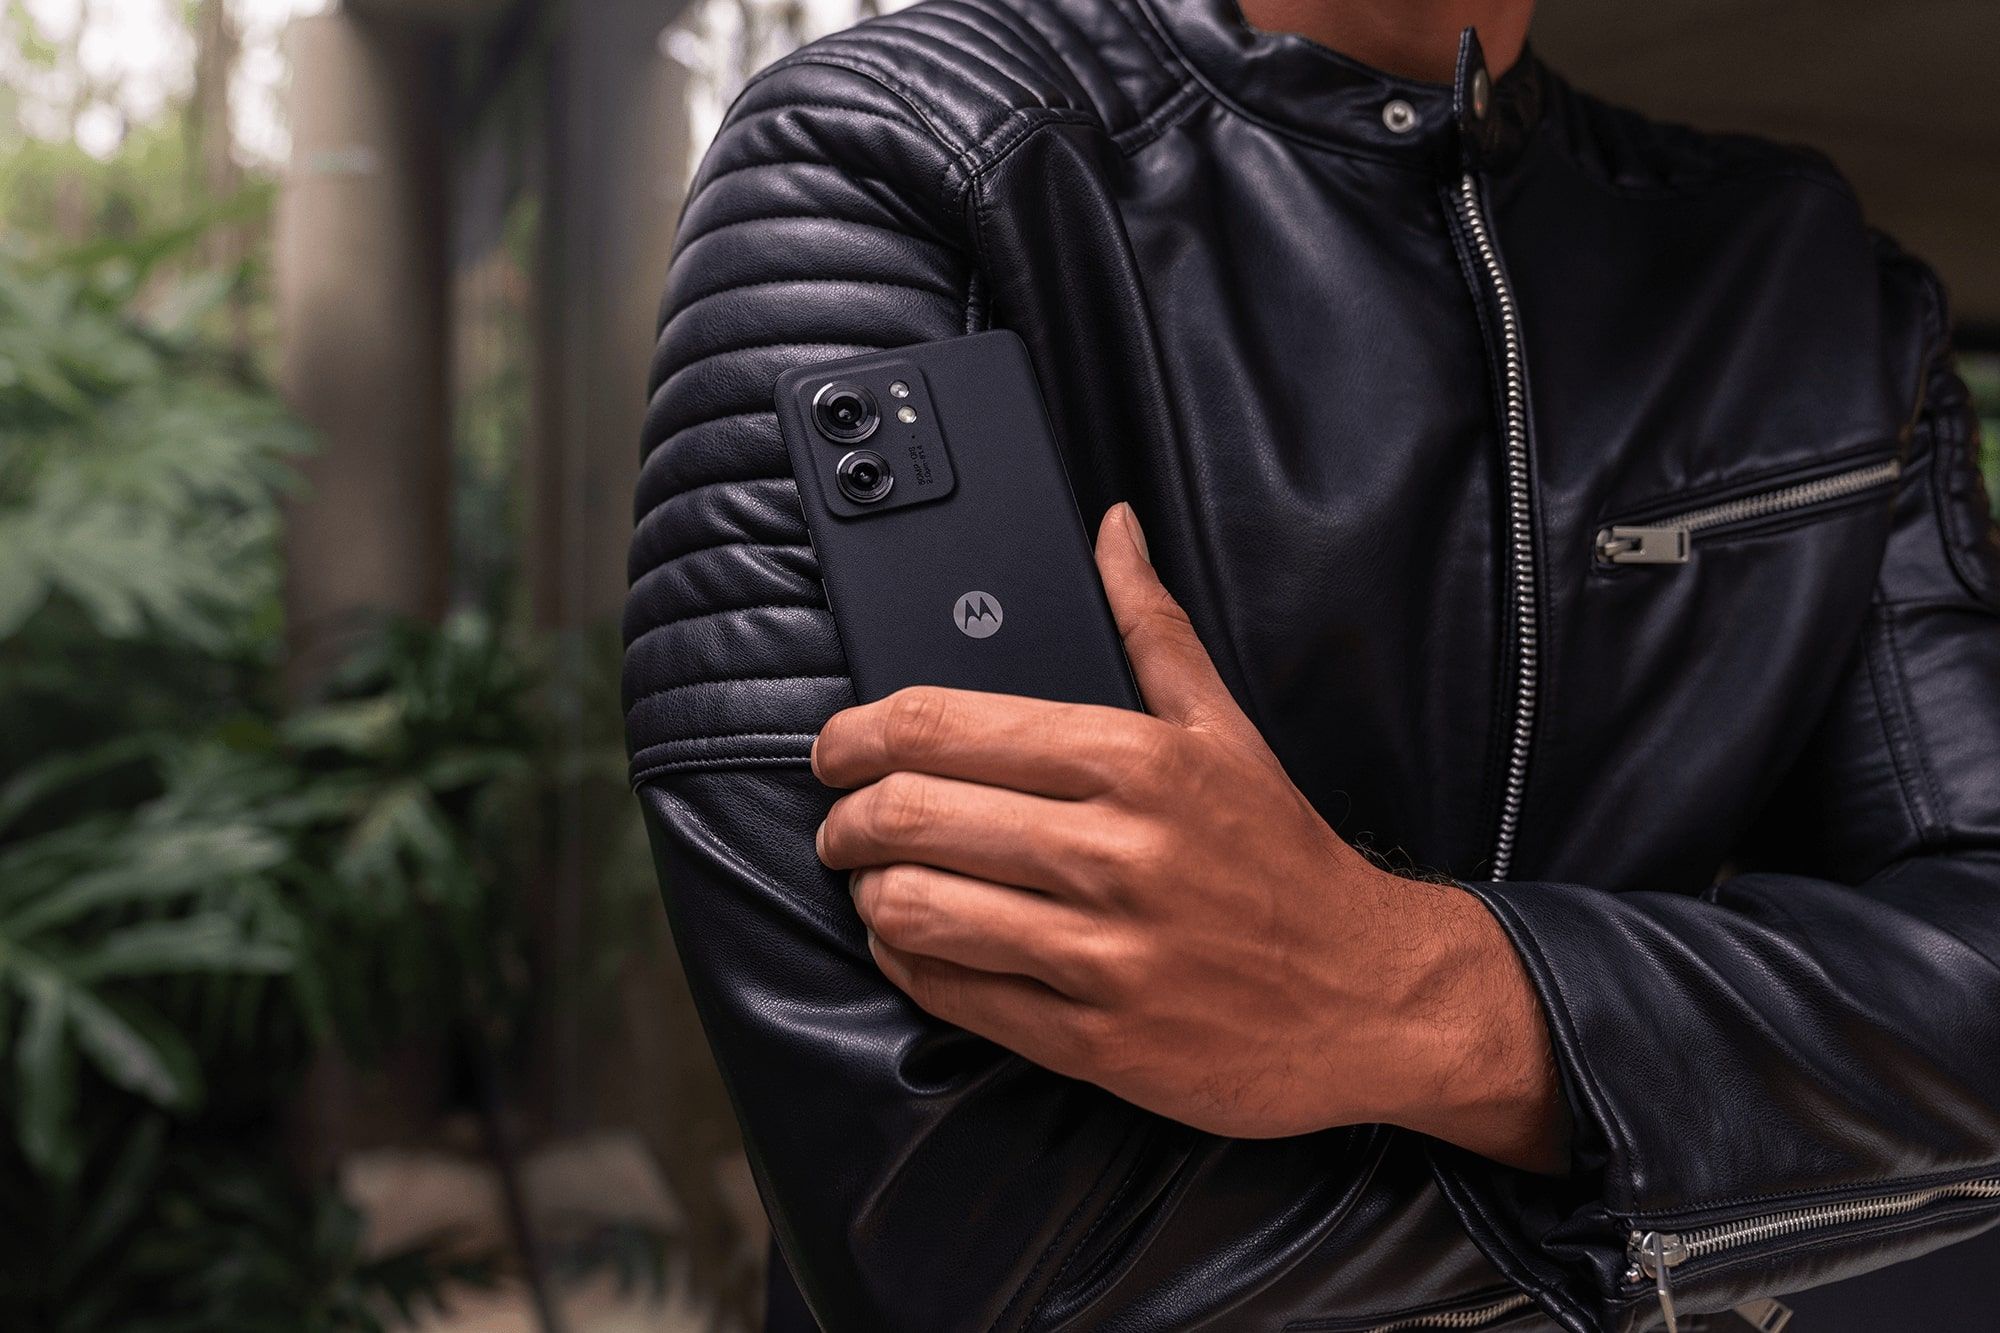 Motorola edge (2023) held by a person in a leather jacket against a forested background 